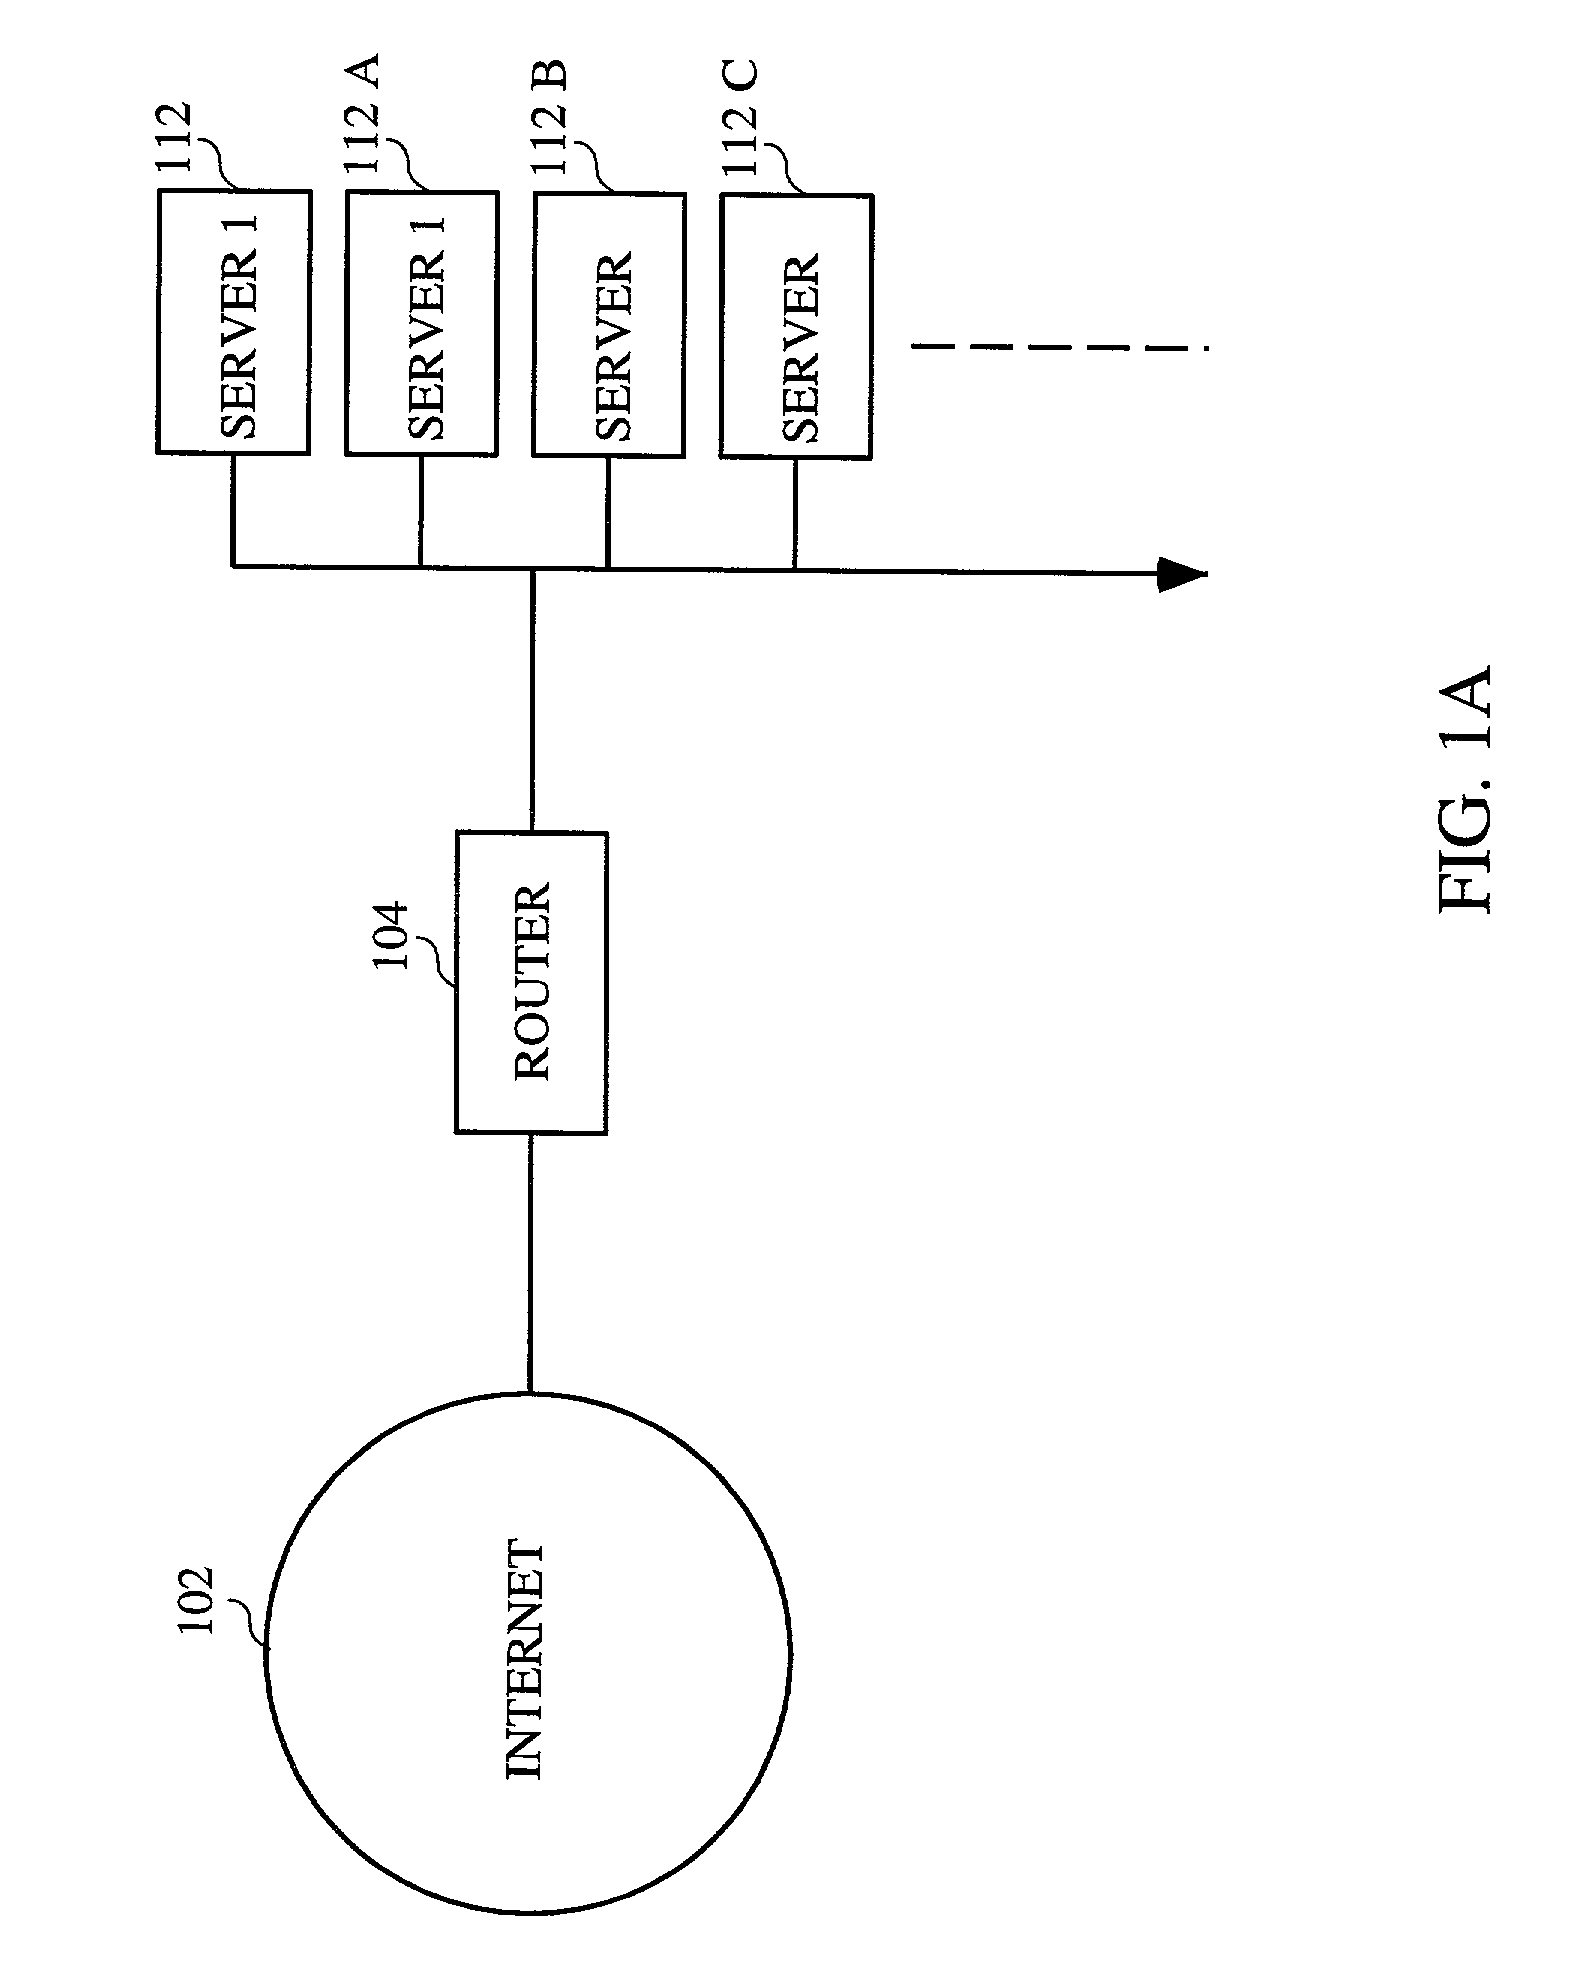 System for distributing load over multiple servers at an internet site